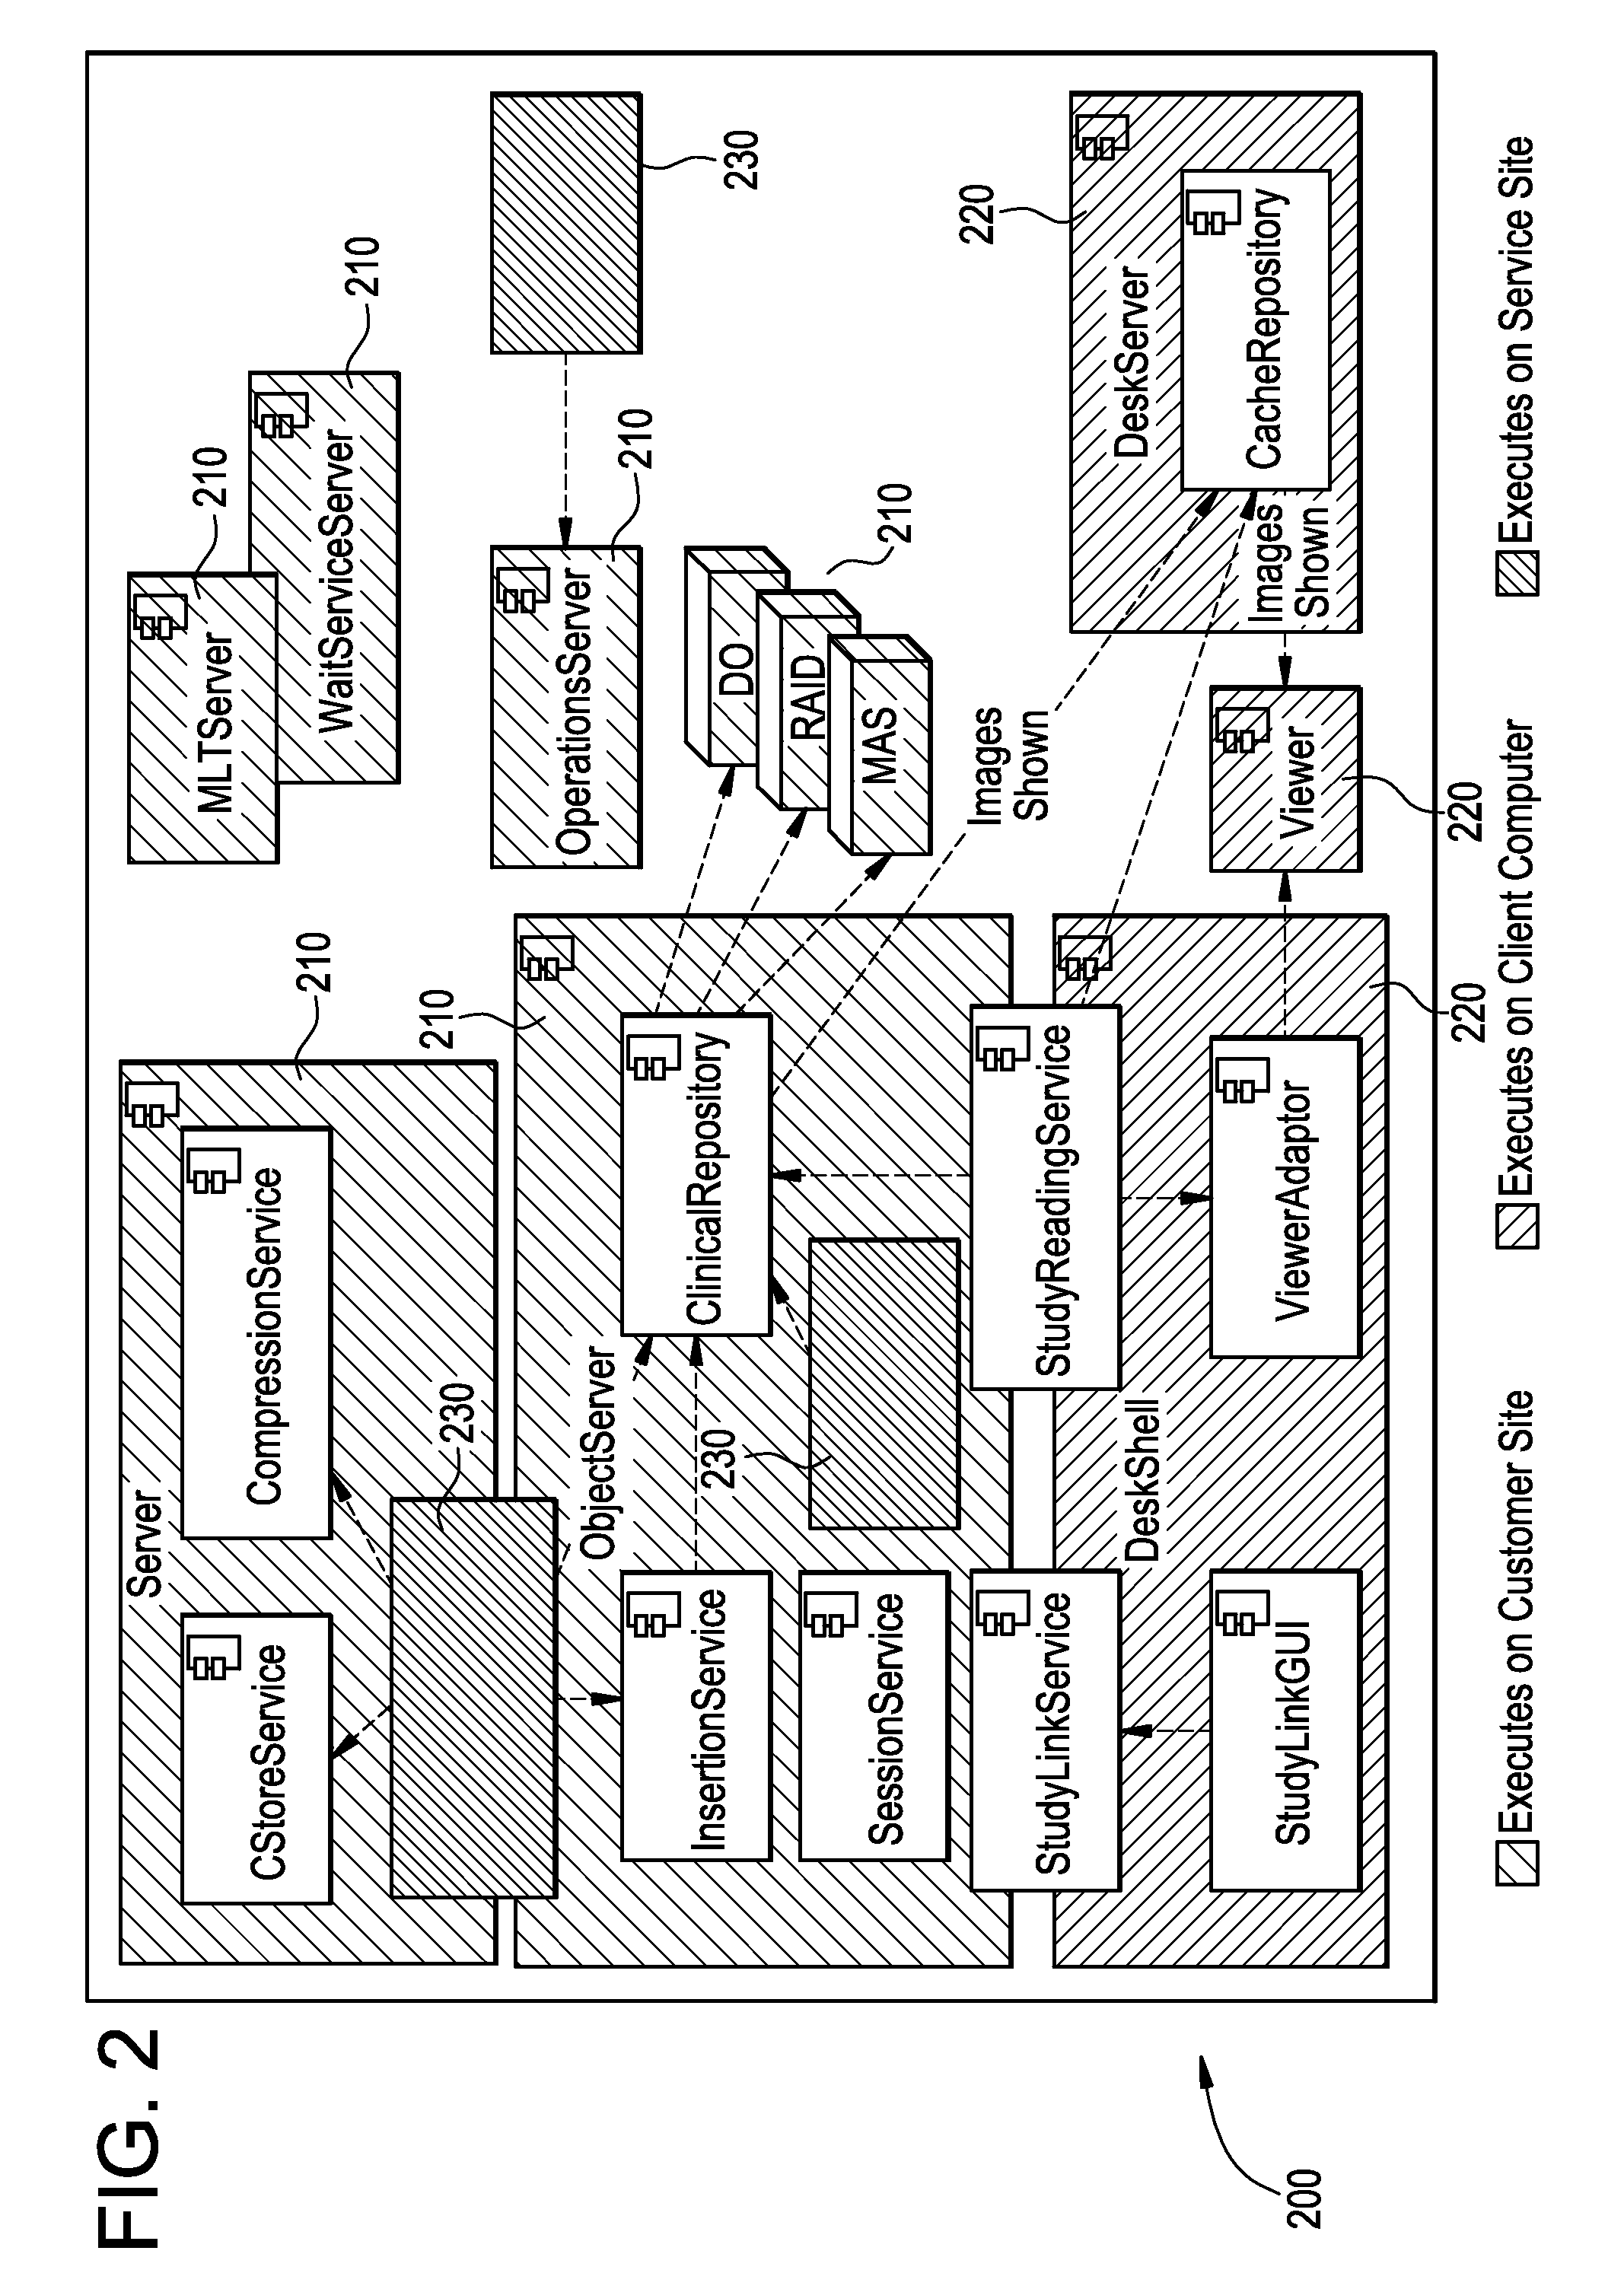 Systems and methods for delivering media content and improving diagnostic reading efficiency